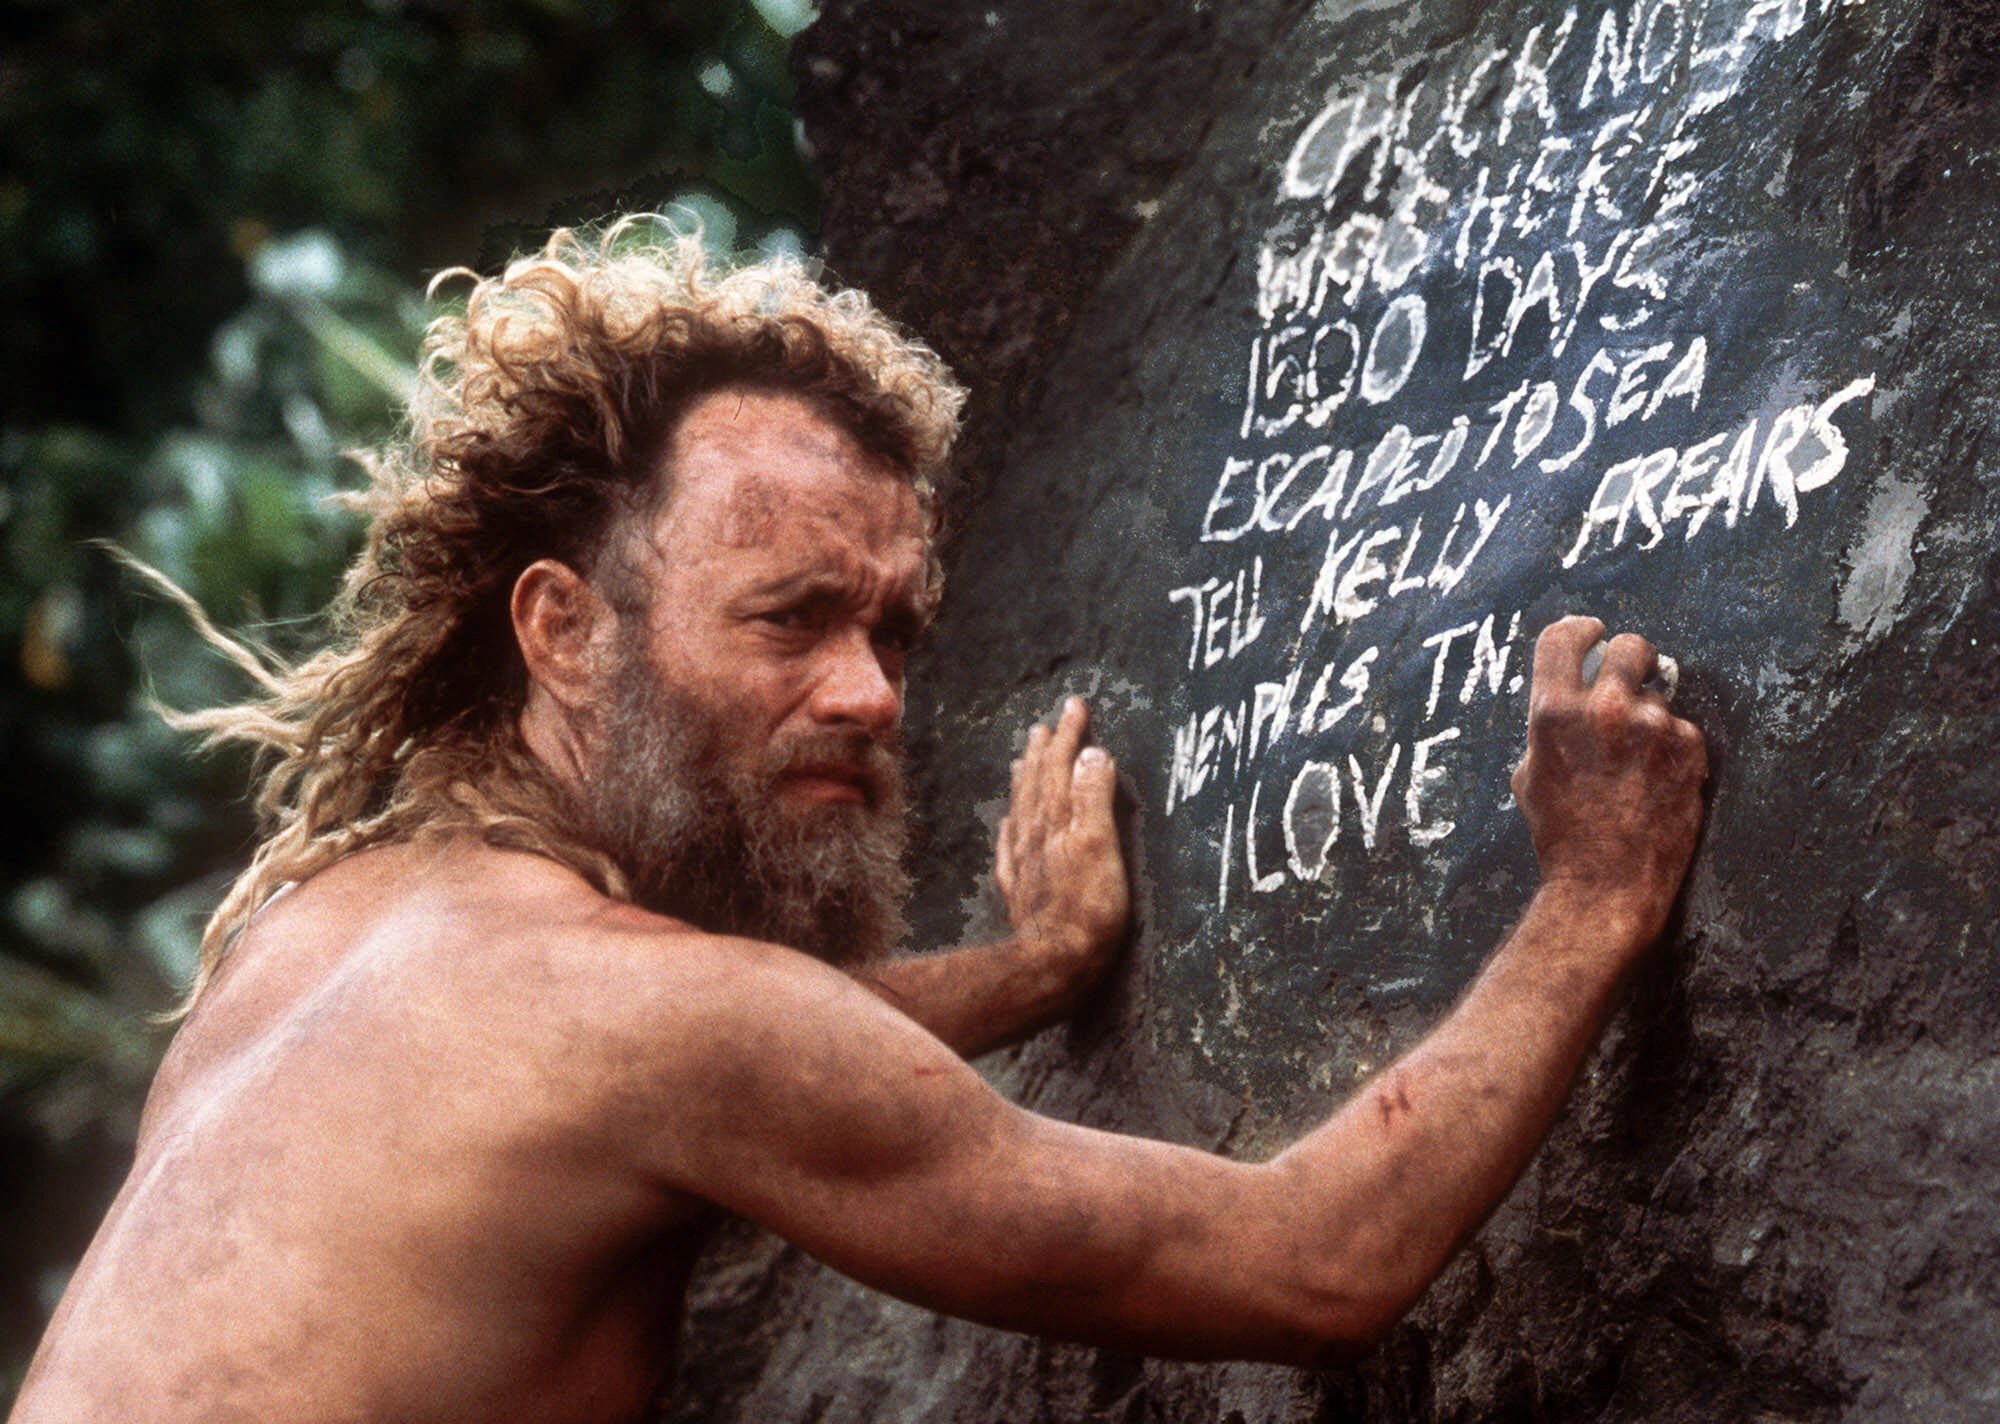 movies with sad endings  - Cast Away